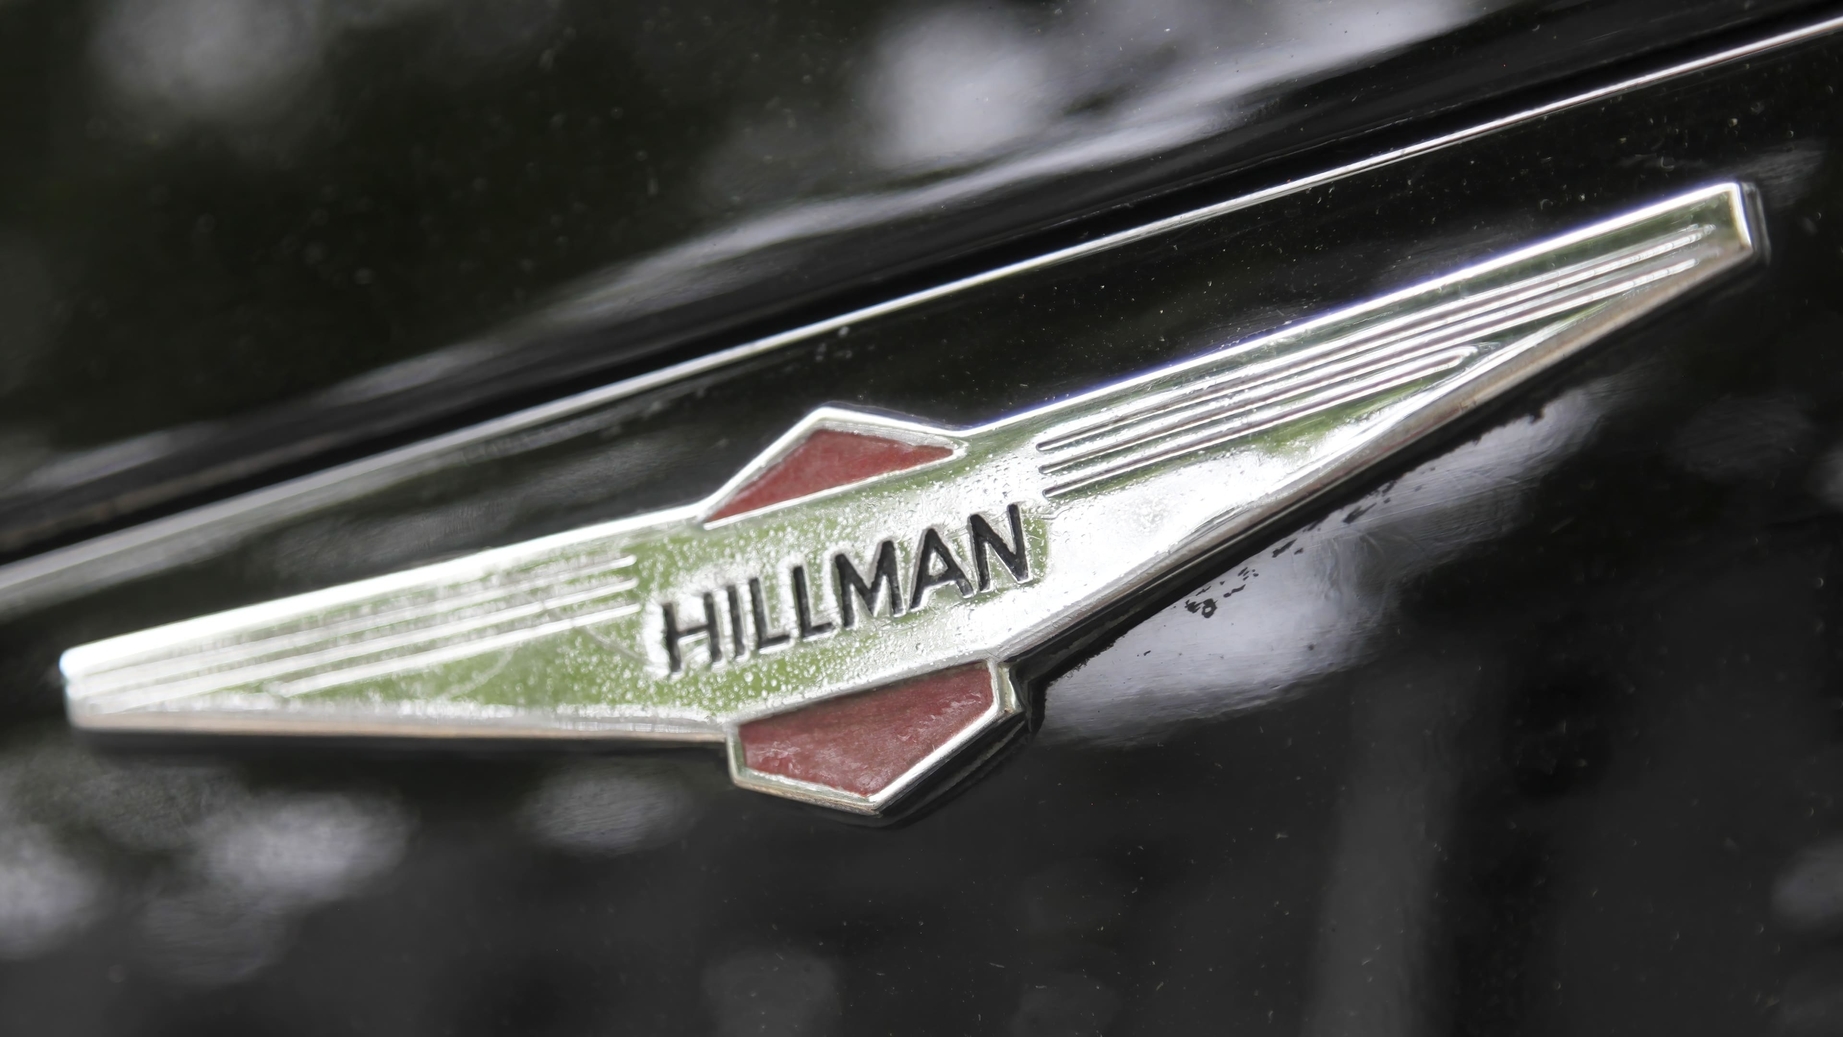 Hillman sign with wings